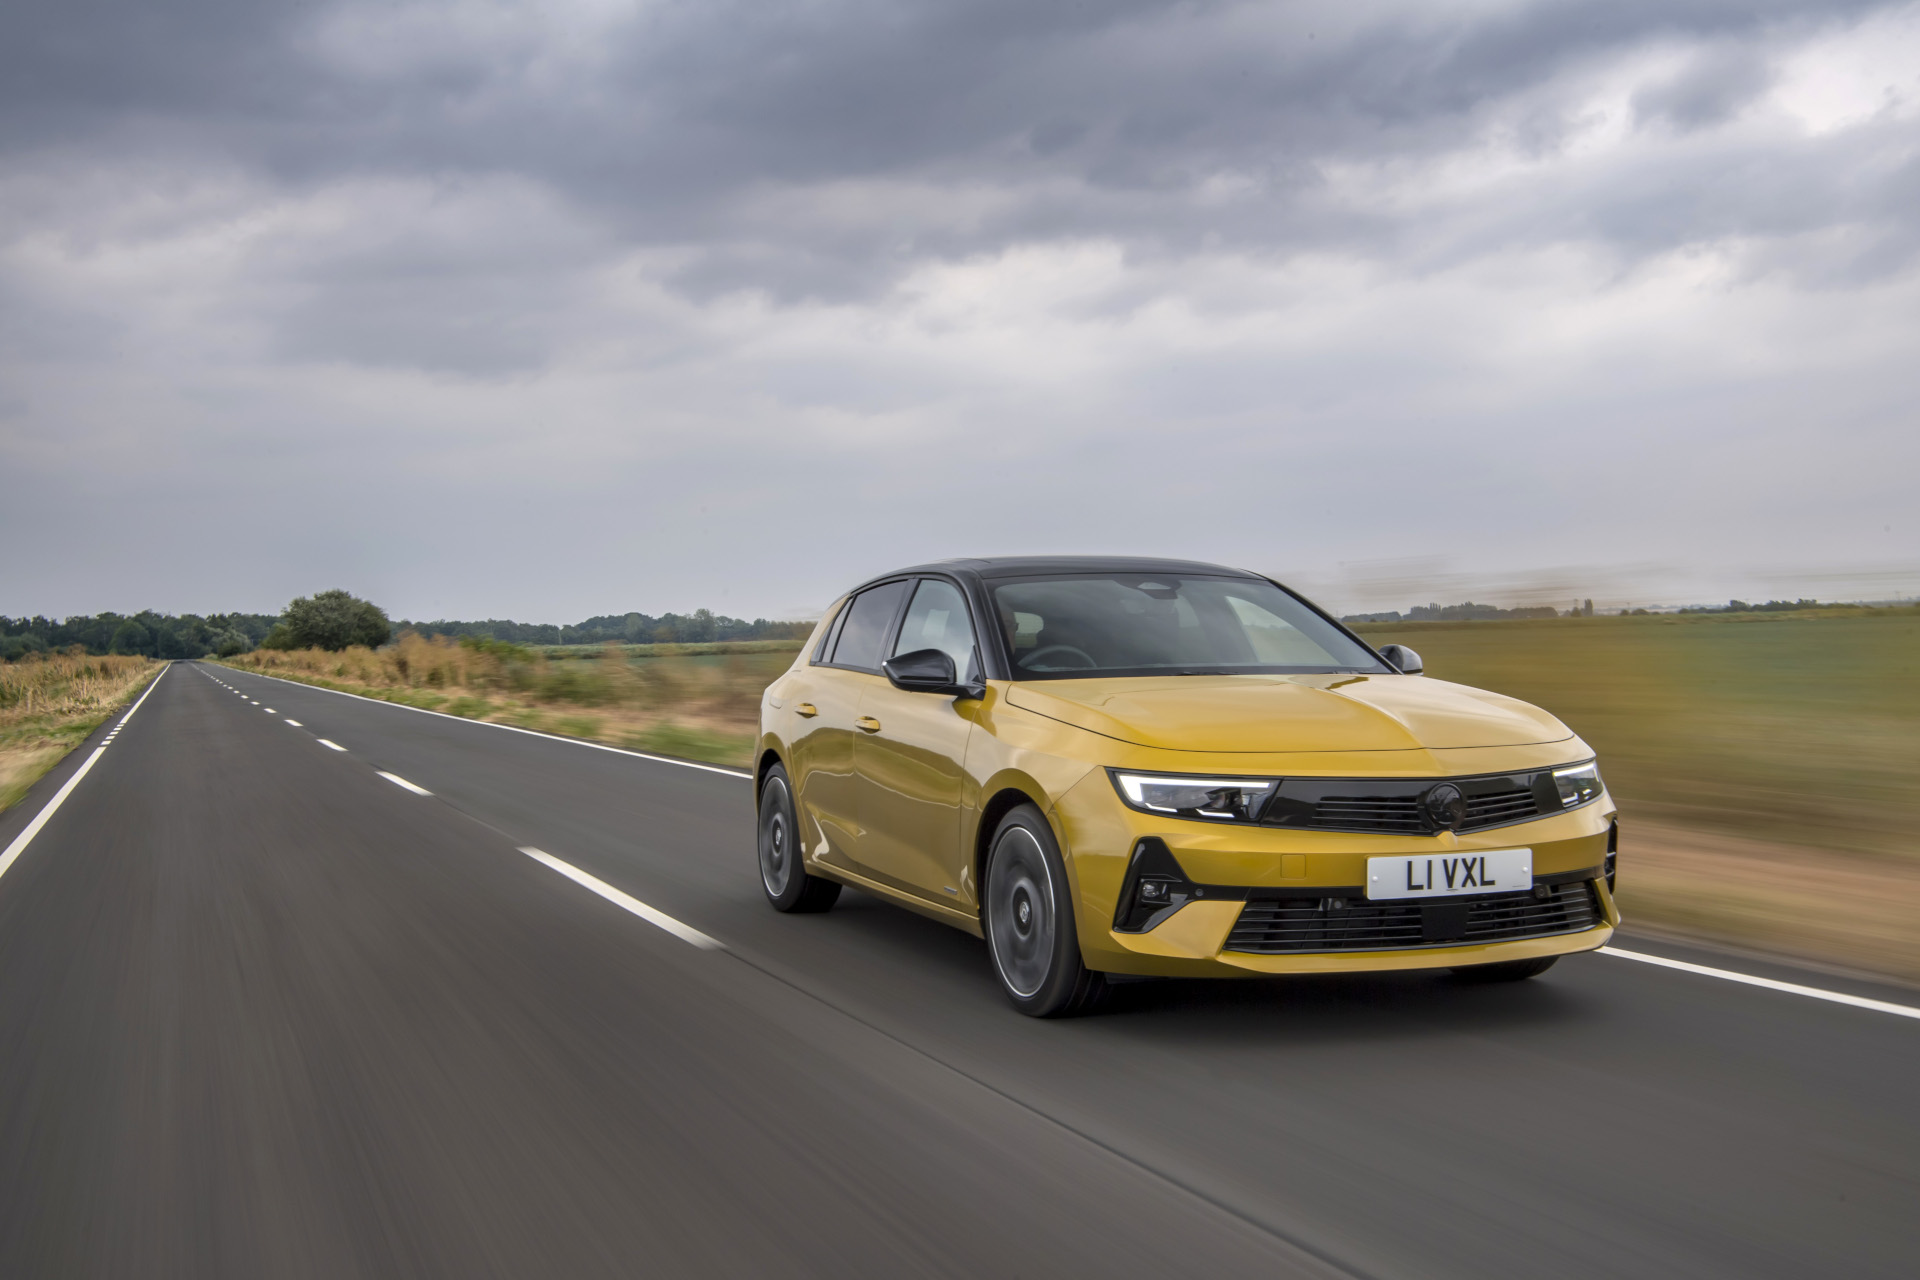 2022 Business Car Awards: All-New Vauxhall Astra named ‘Best Family Car’